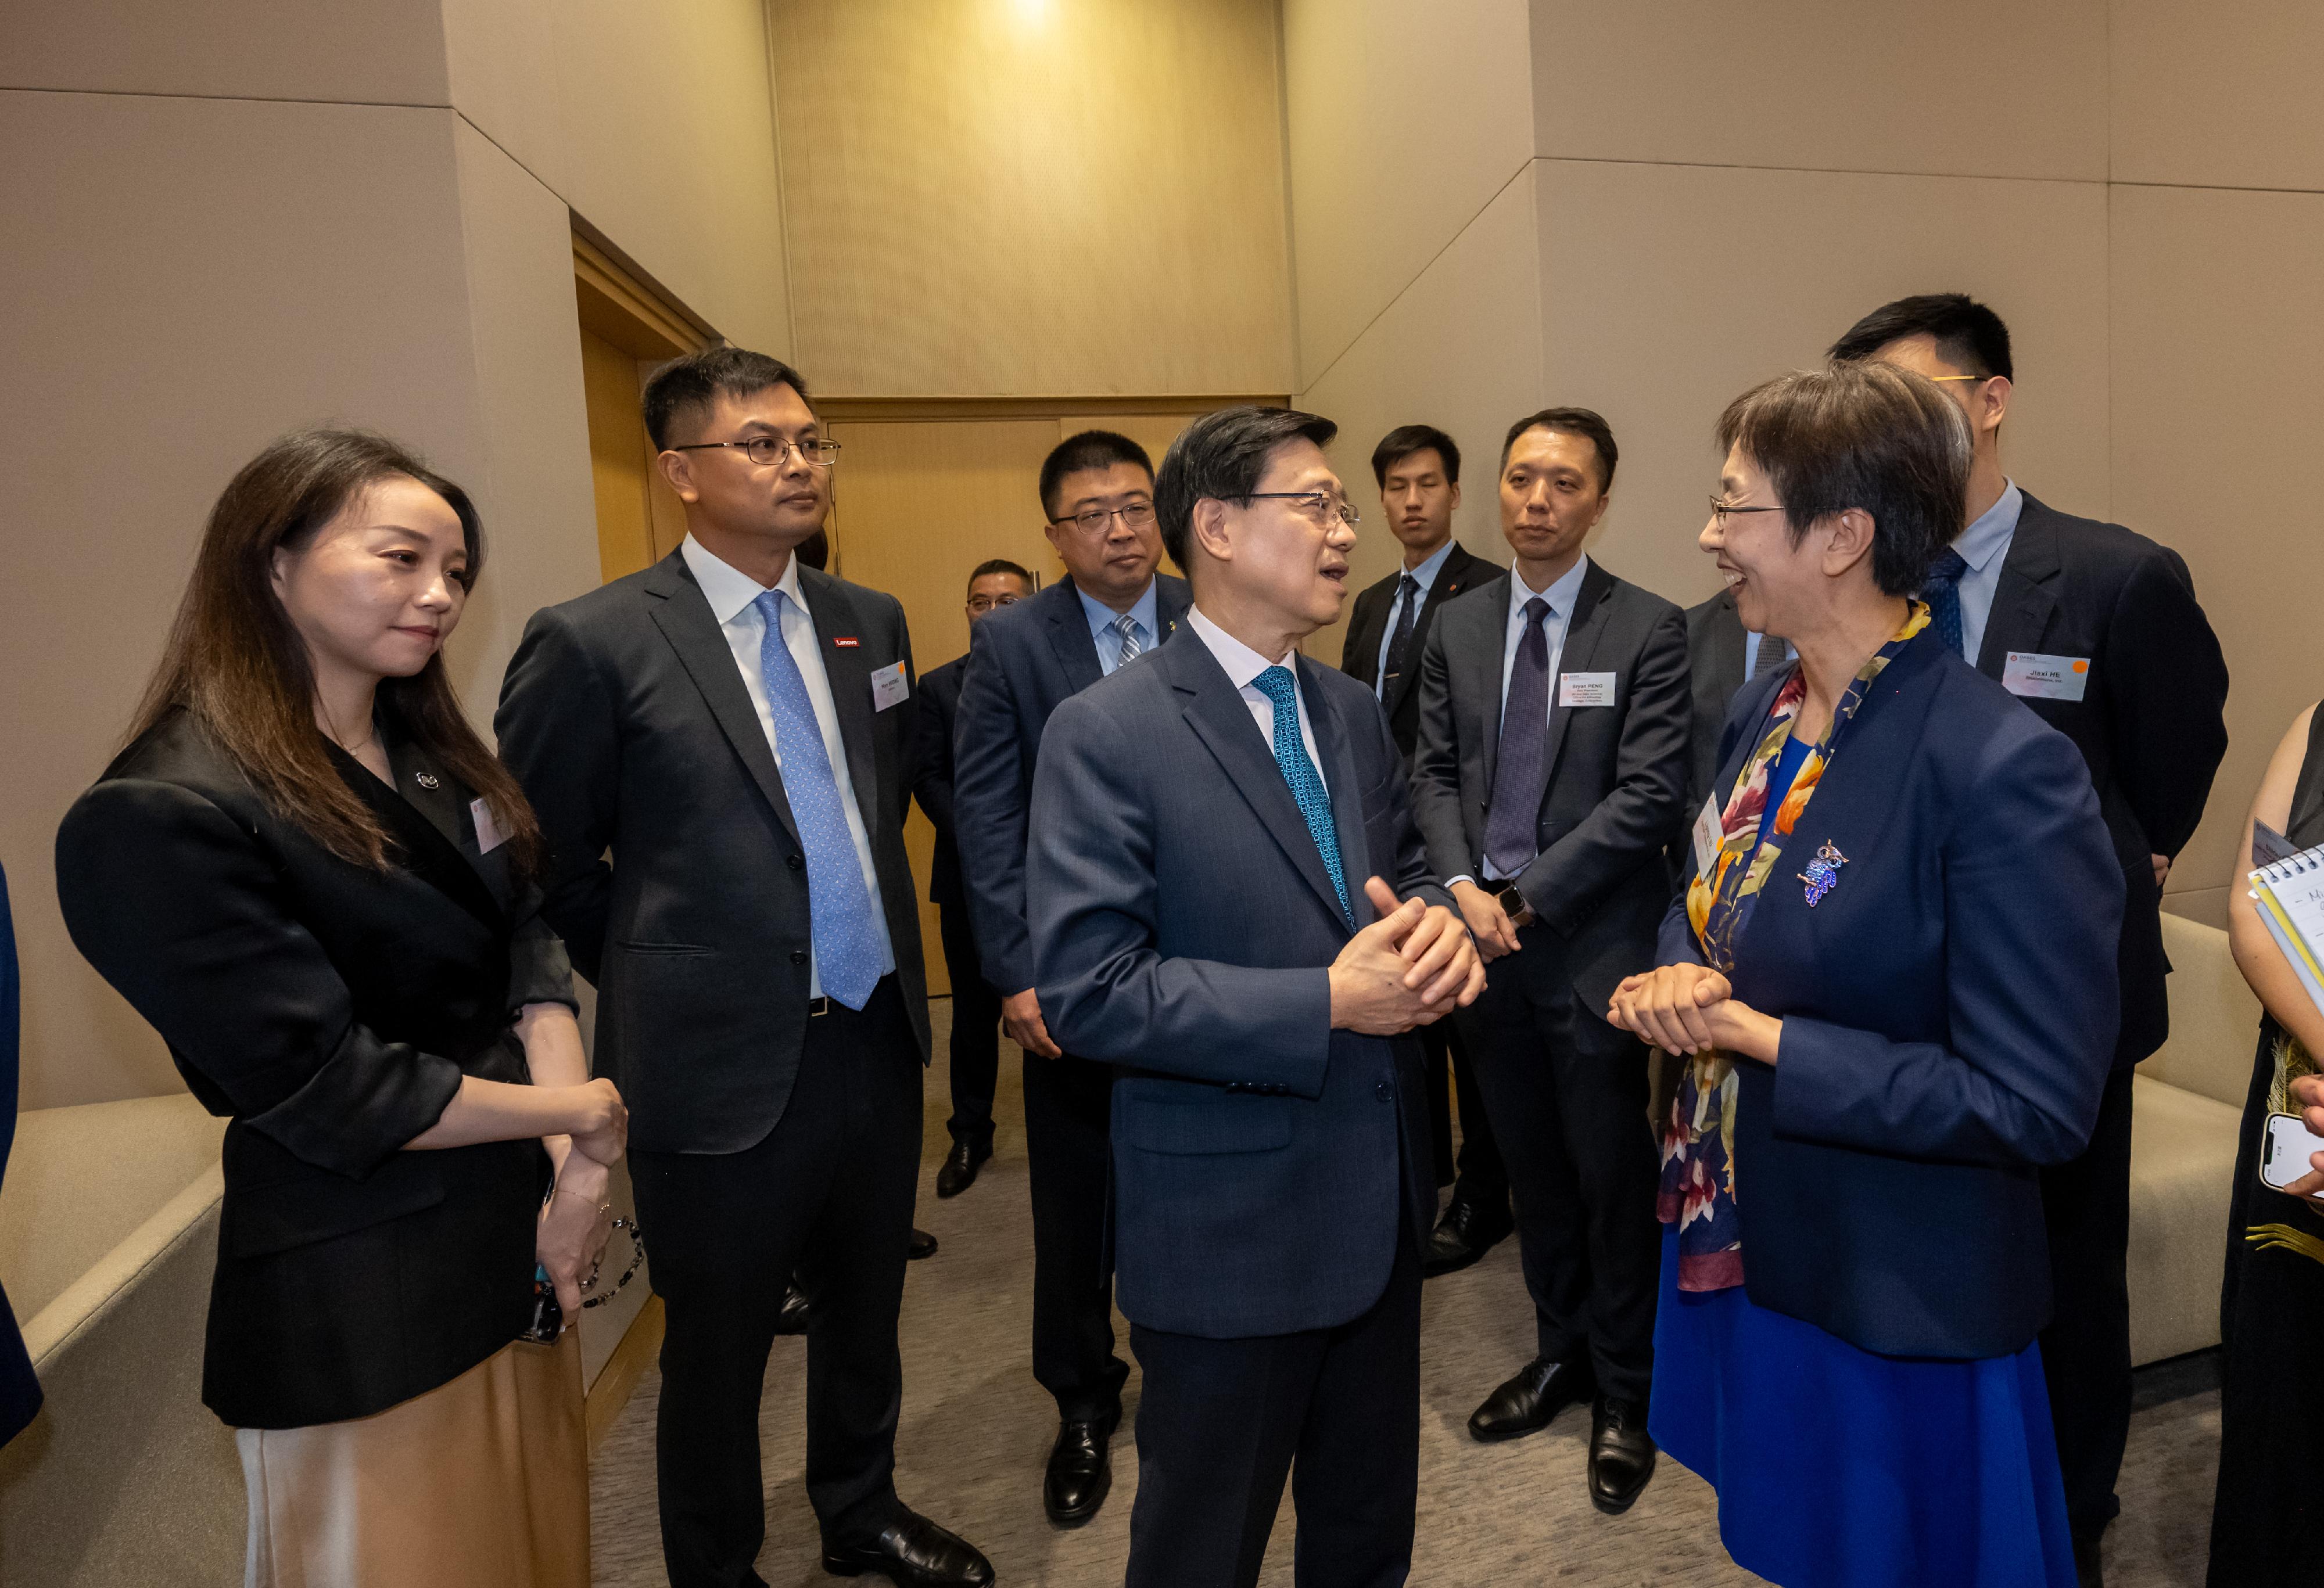 The Office for Attracting Attracting Strategic Enterprises (OASES) held the Launching Ceremony of OASES Partnership. Photo shows the Chief Executive, Mr John Lee (second right), interacting with the representatives of strategic enterprises.